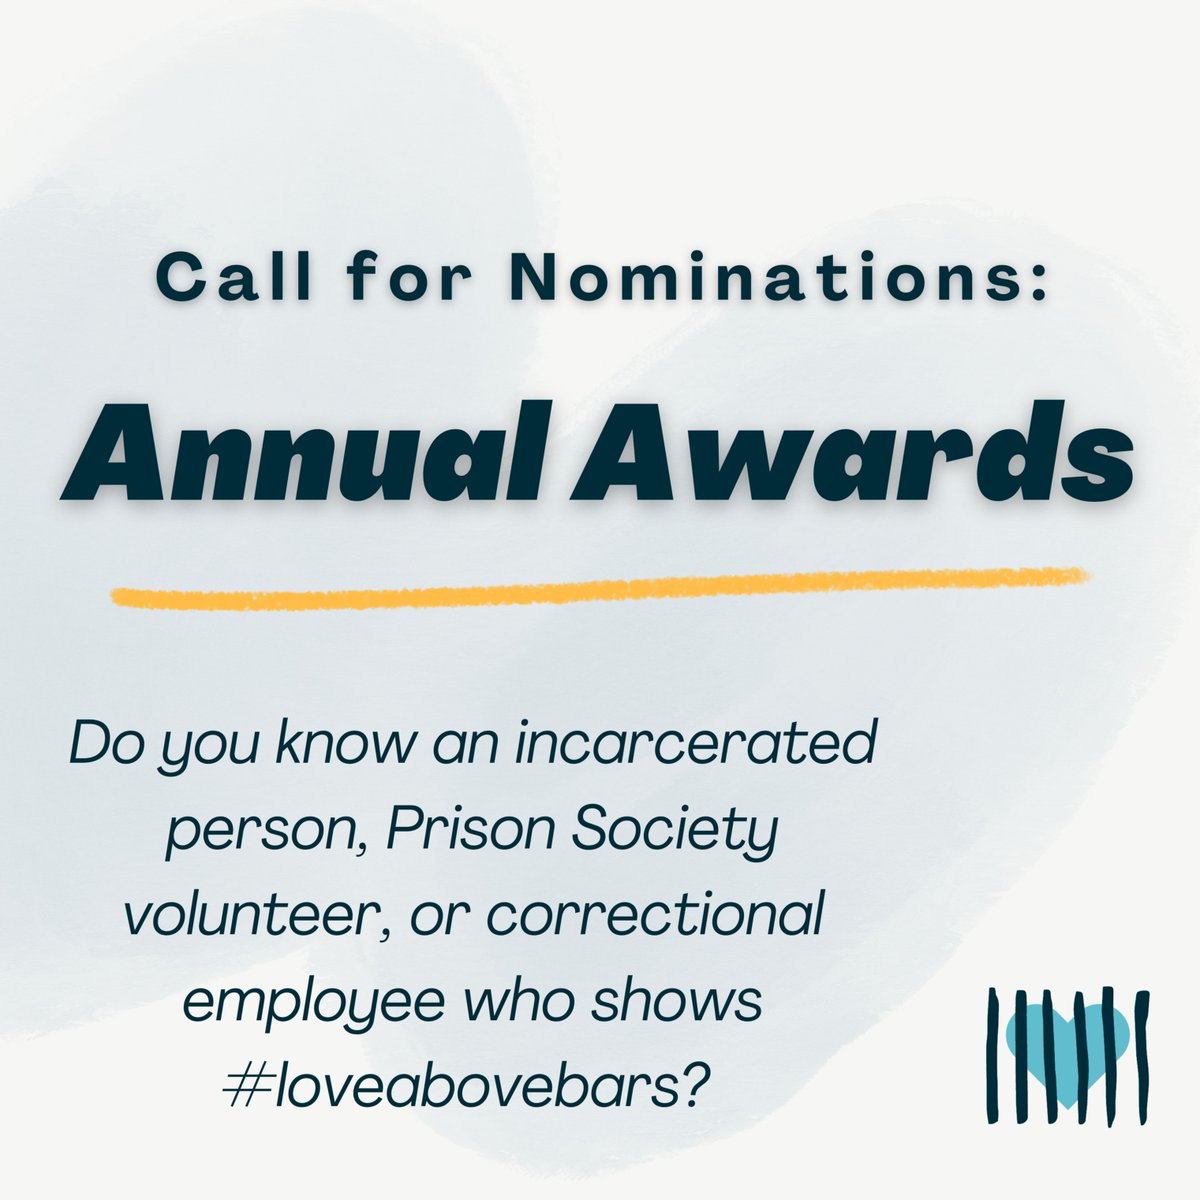 📣 We are still accepting nominations for our 2024 Annual Awards! Do you know an incarcerated person, volunteer, or correctional employee who shows #loveabovebars? Nominate them today: bit.ly/49YQmW6